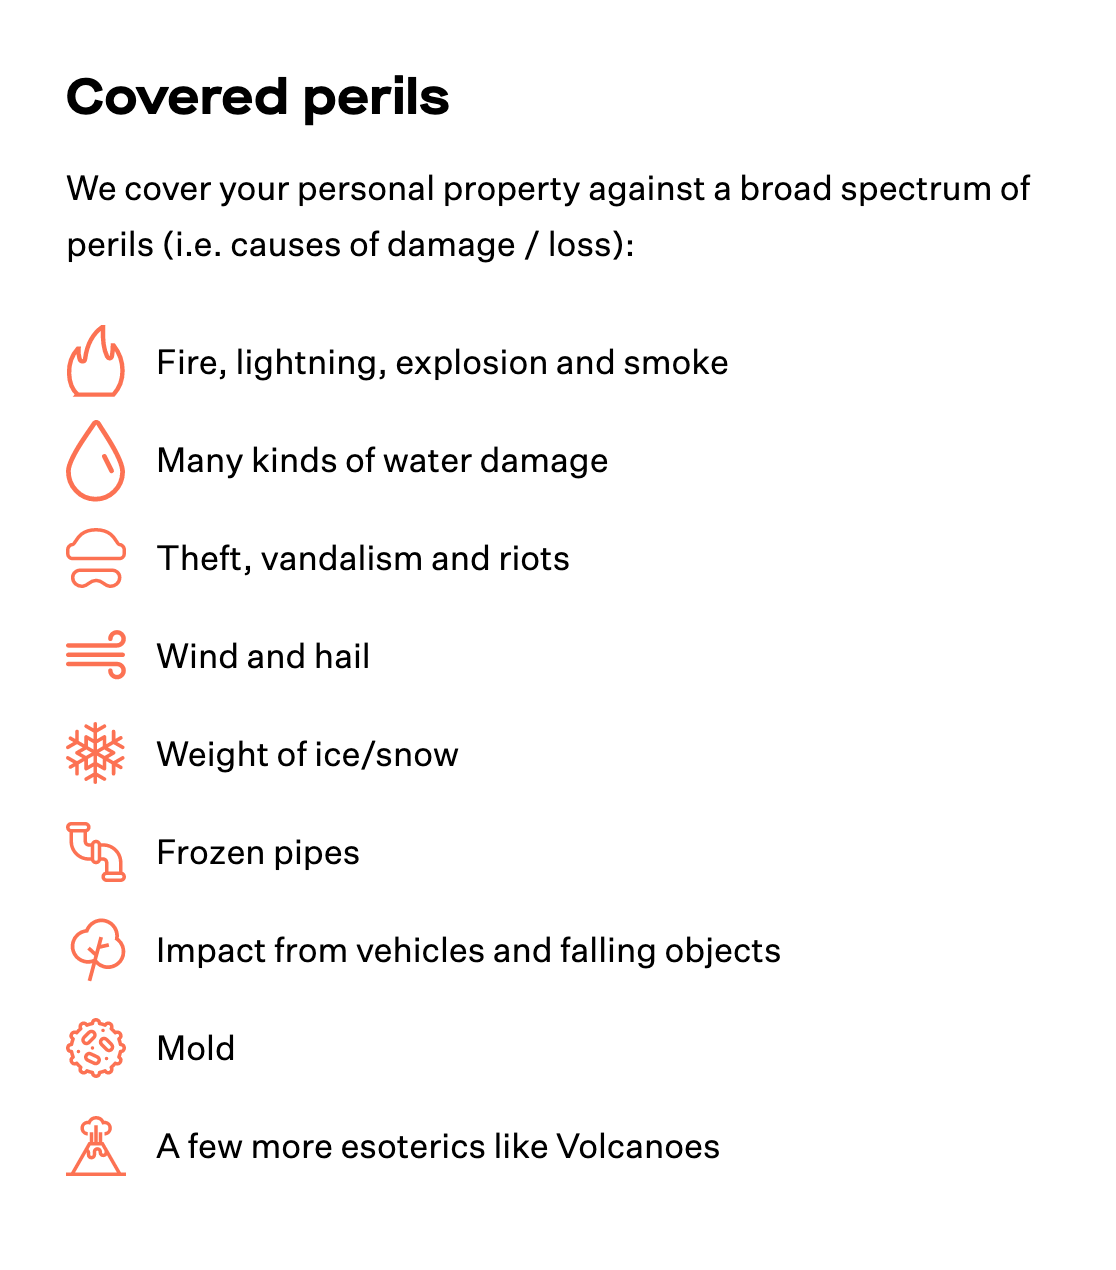 Goodcover protects against a wide range of covered perils such as fire, many types of water damage, theft, and more.